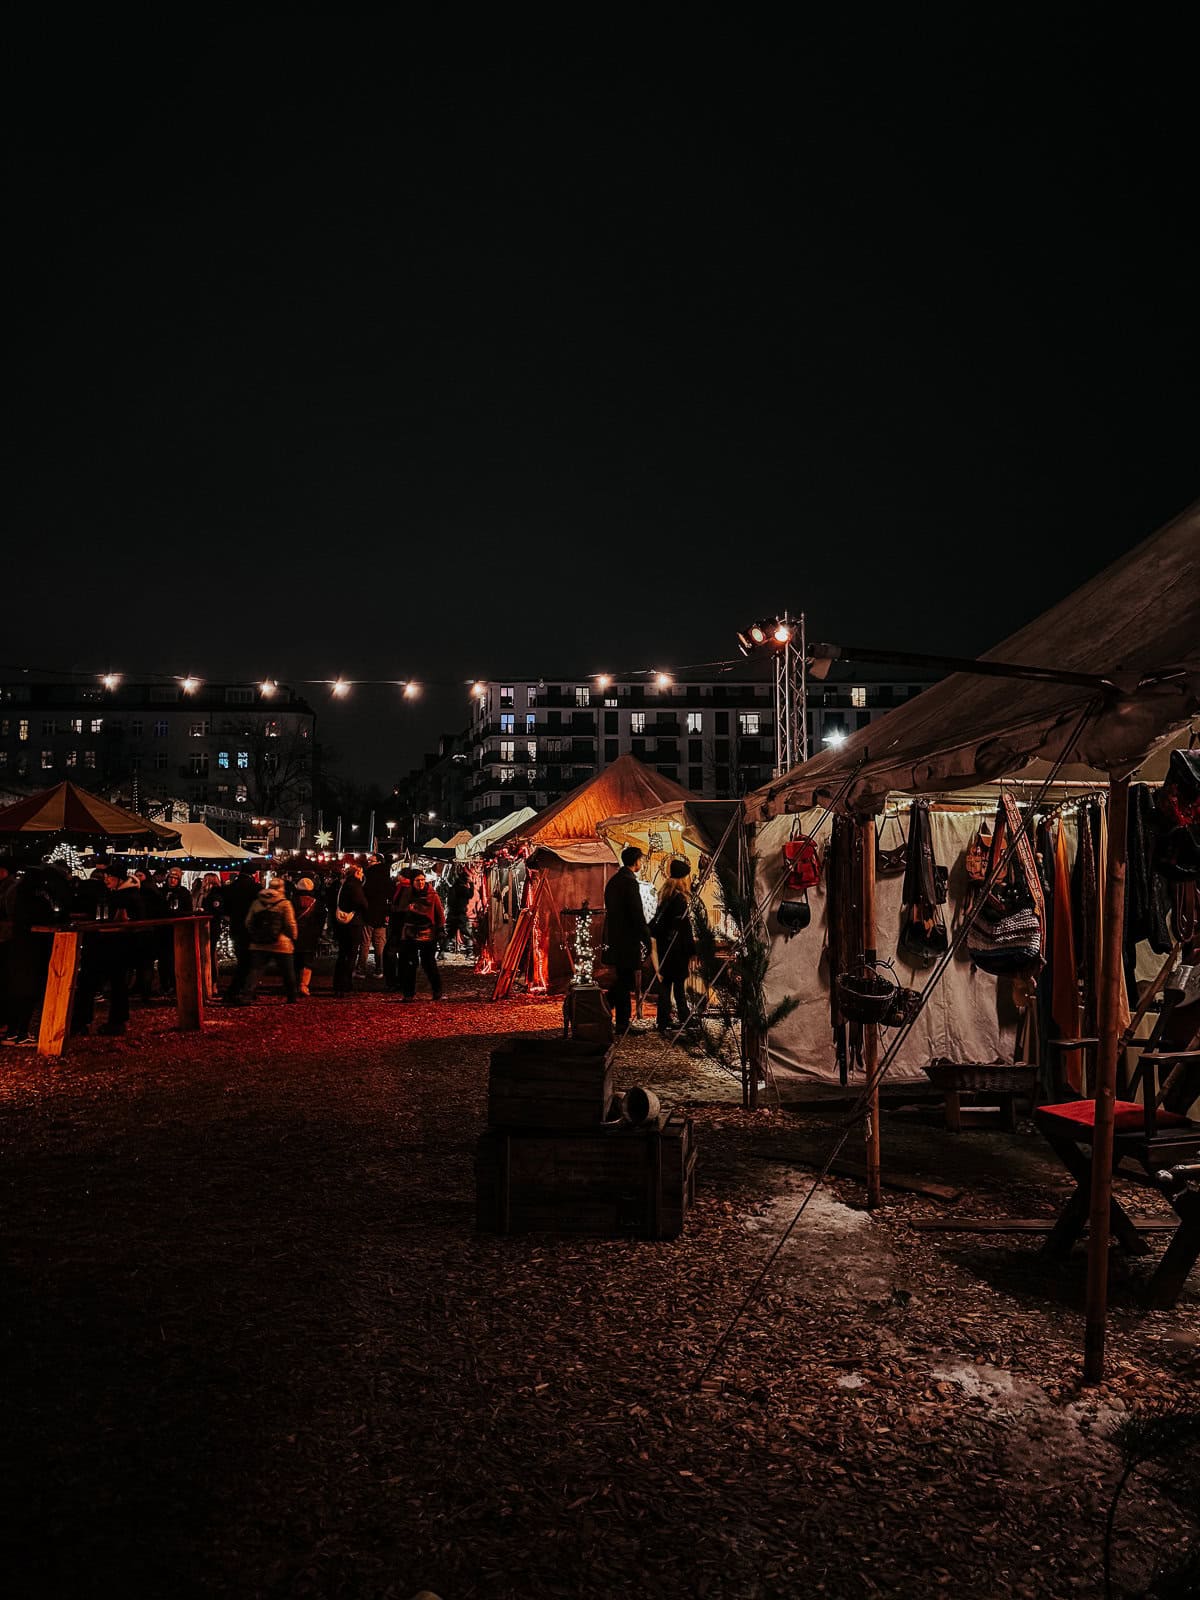 A night-time view of a medieval-themed outdoor market lit by string lights, with tents and stalls displaying various goods. The atmosphere is lively with visitors exploring the market on a ground covered with wood chips